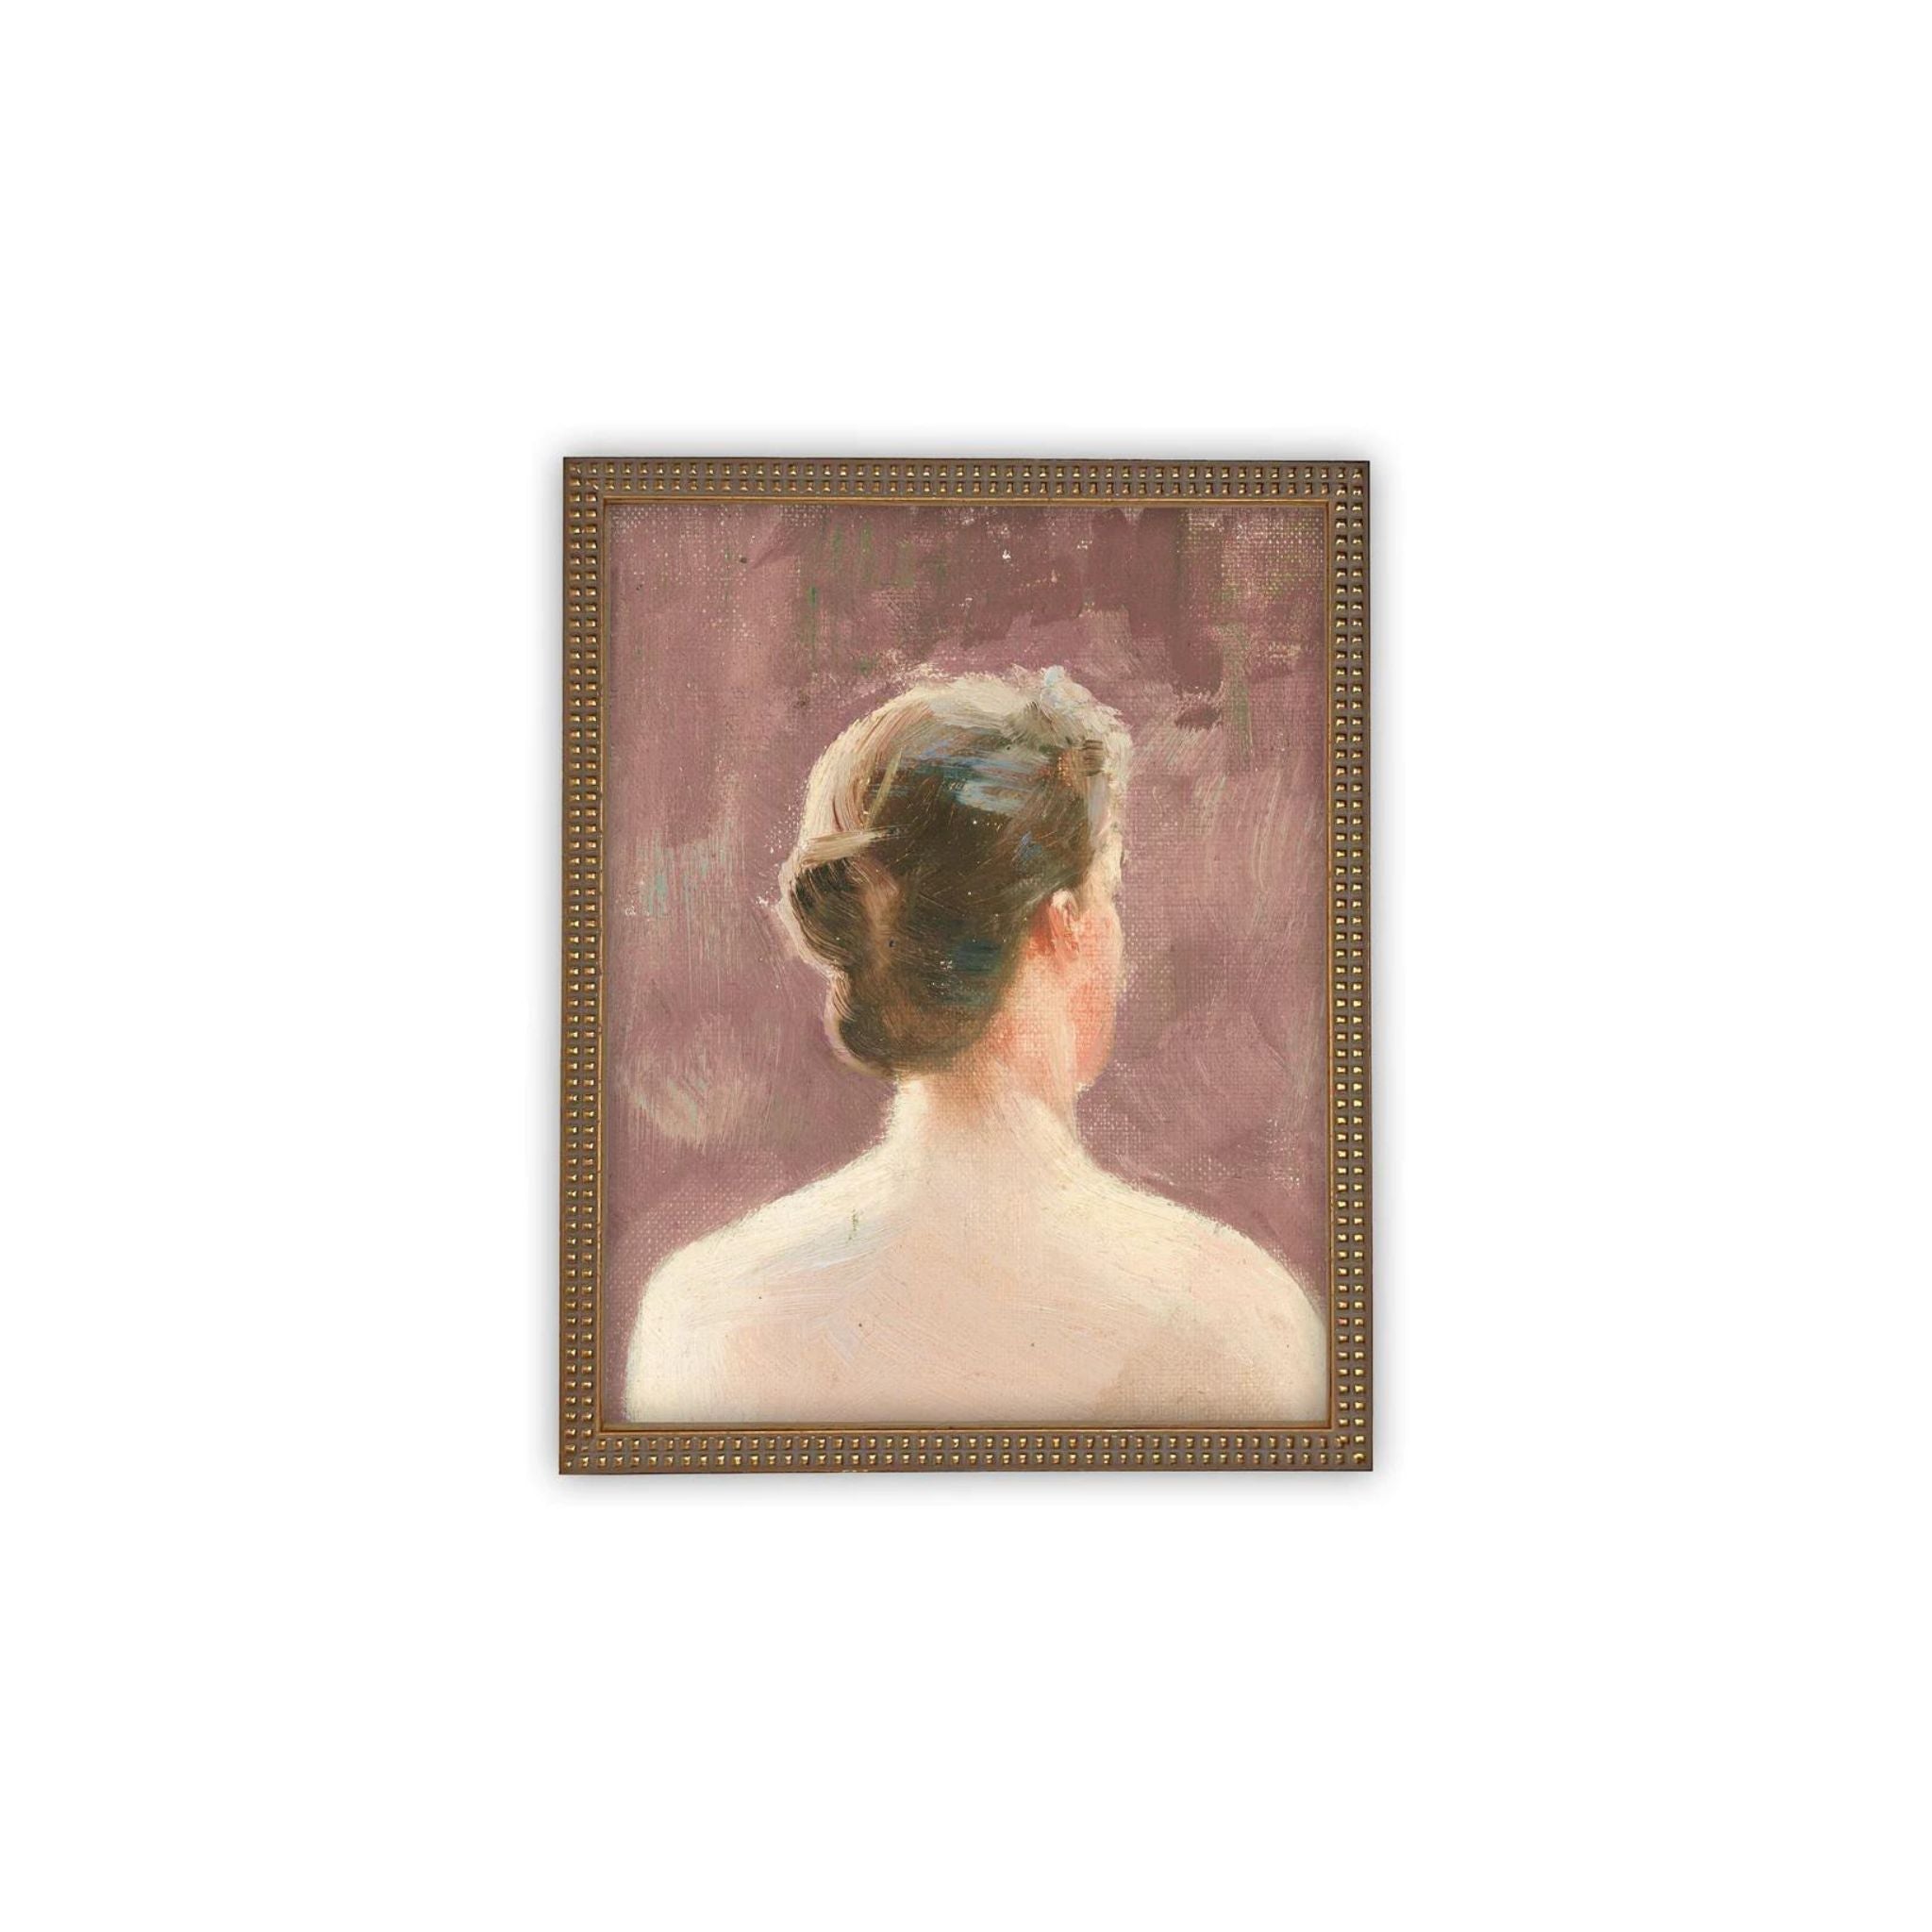 VINTAGE FRAMED CANVAS ART PORTRAIT OF A WOMAN - BEADED GOLD